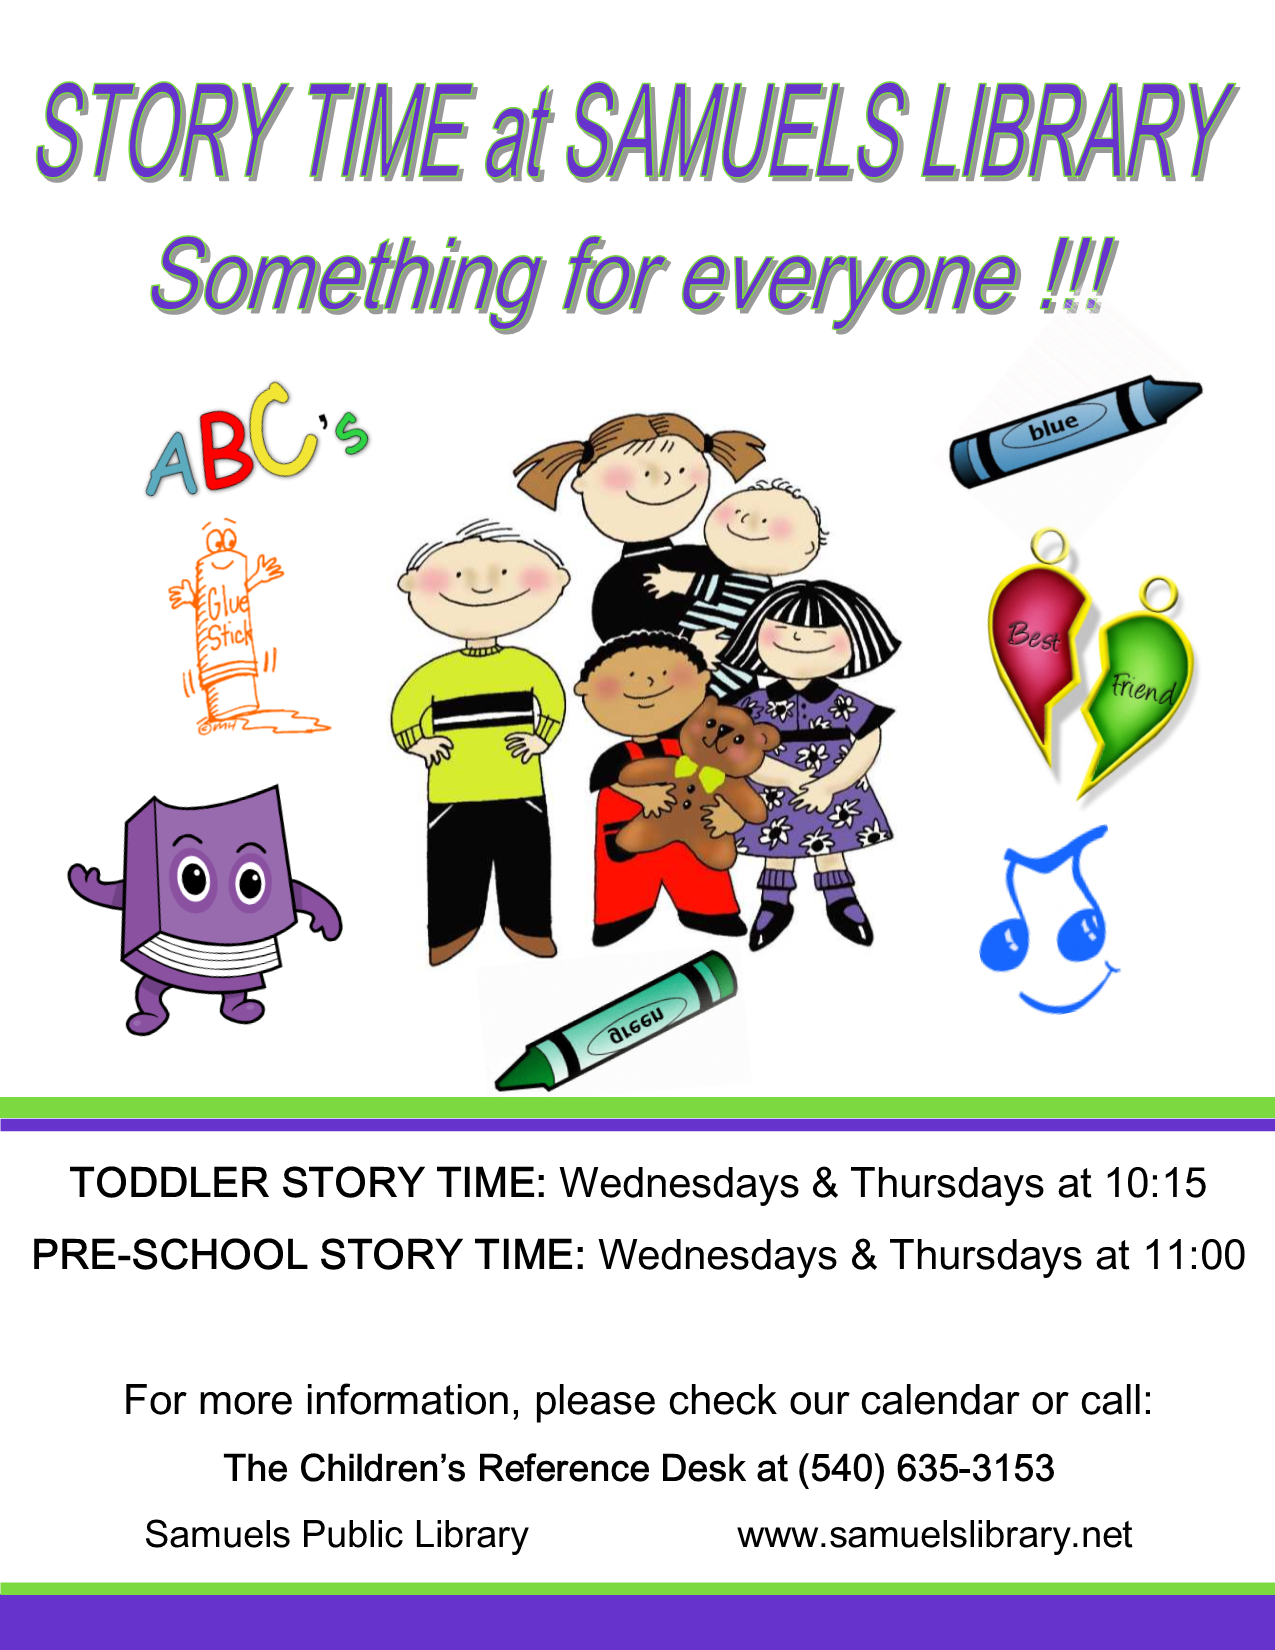 Preschool Story times meet on Wednesday and Thursday.